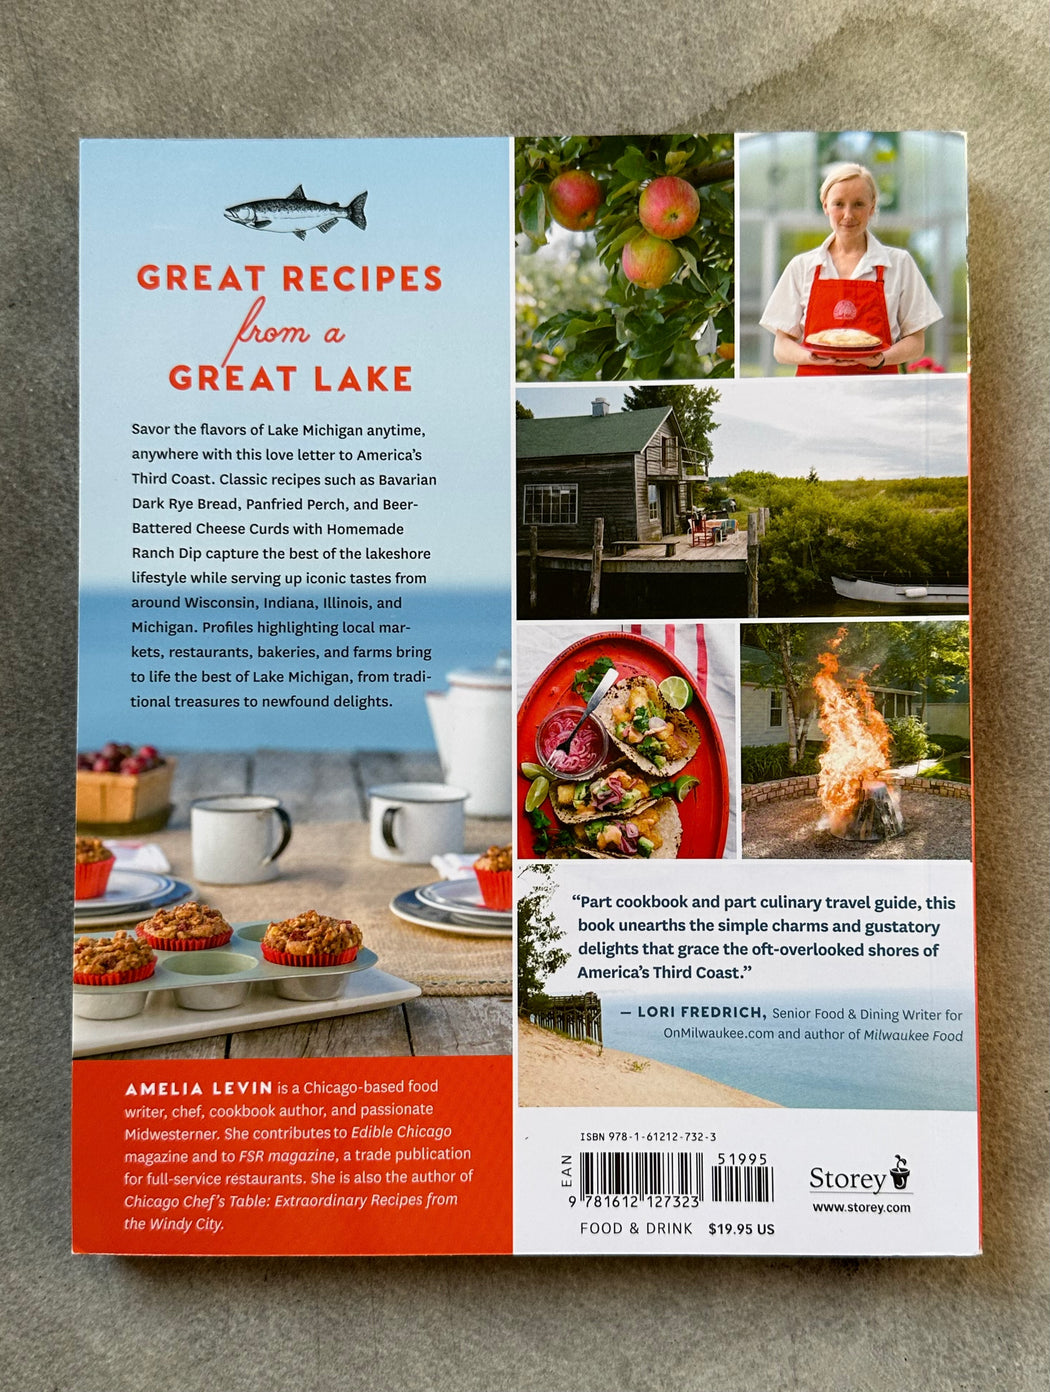 "The Lake Michigan Cottage Cookbook" by Amelia Levin